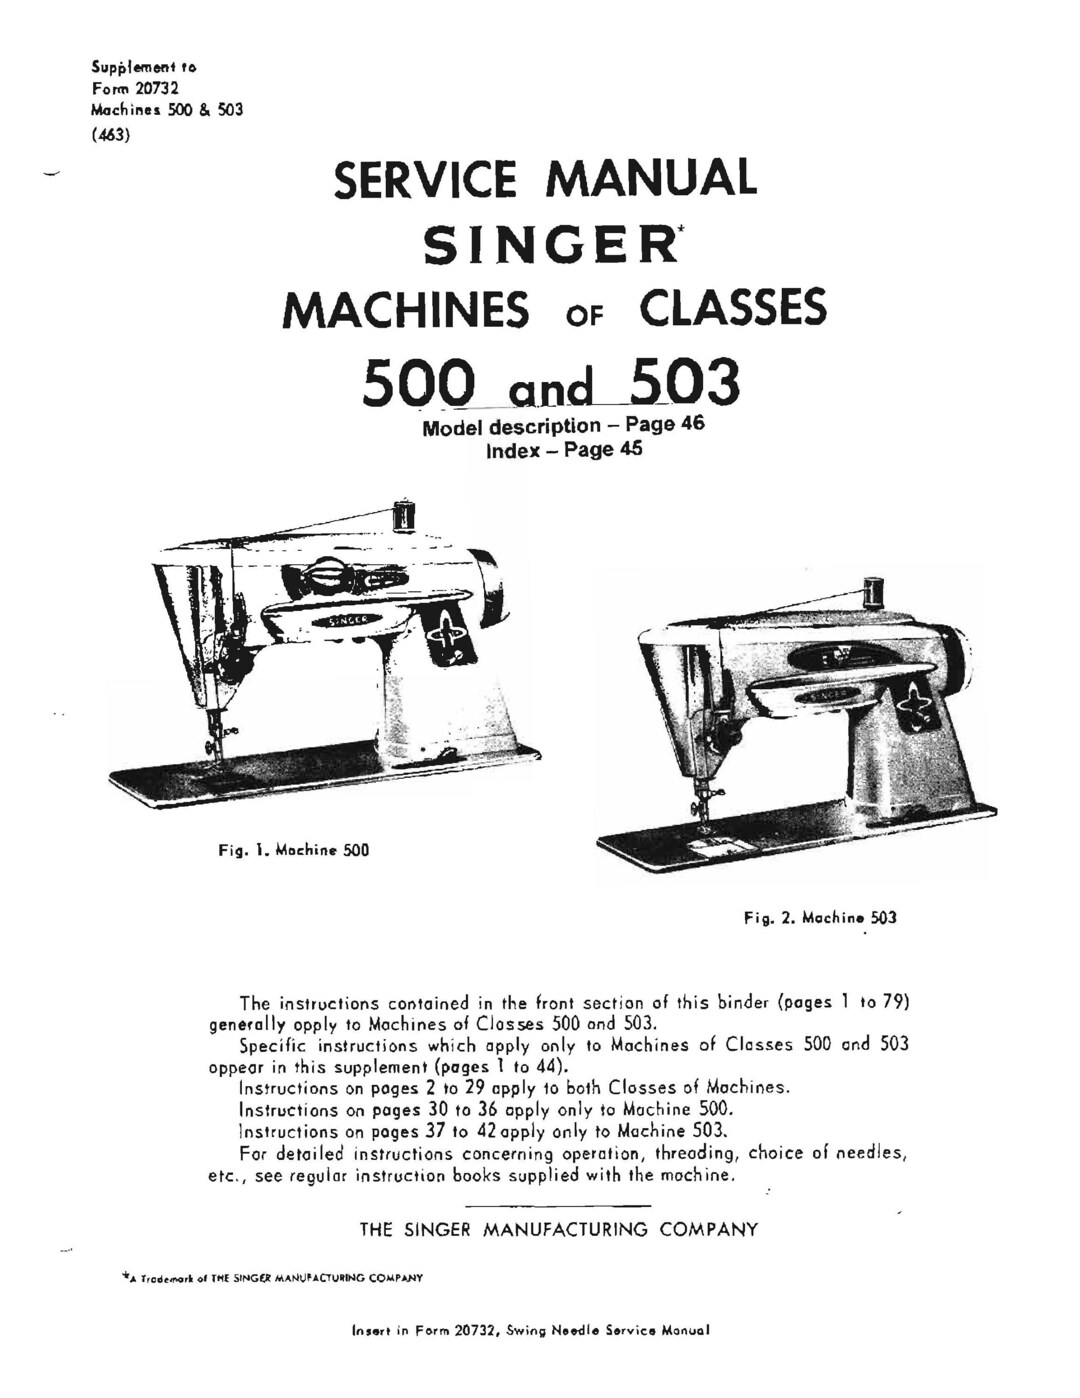 manual for a swinger sewing machine